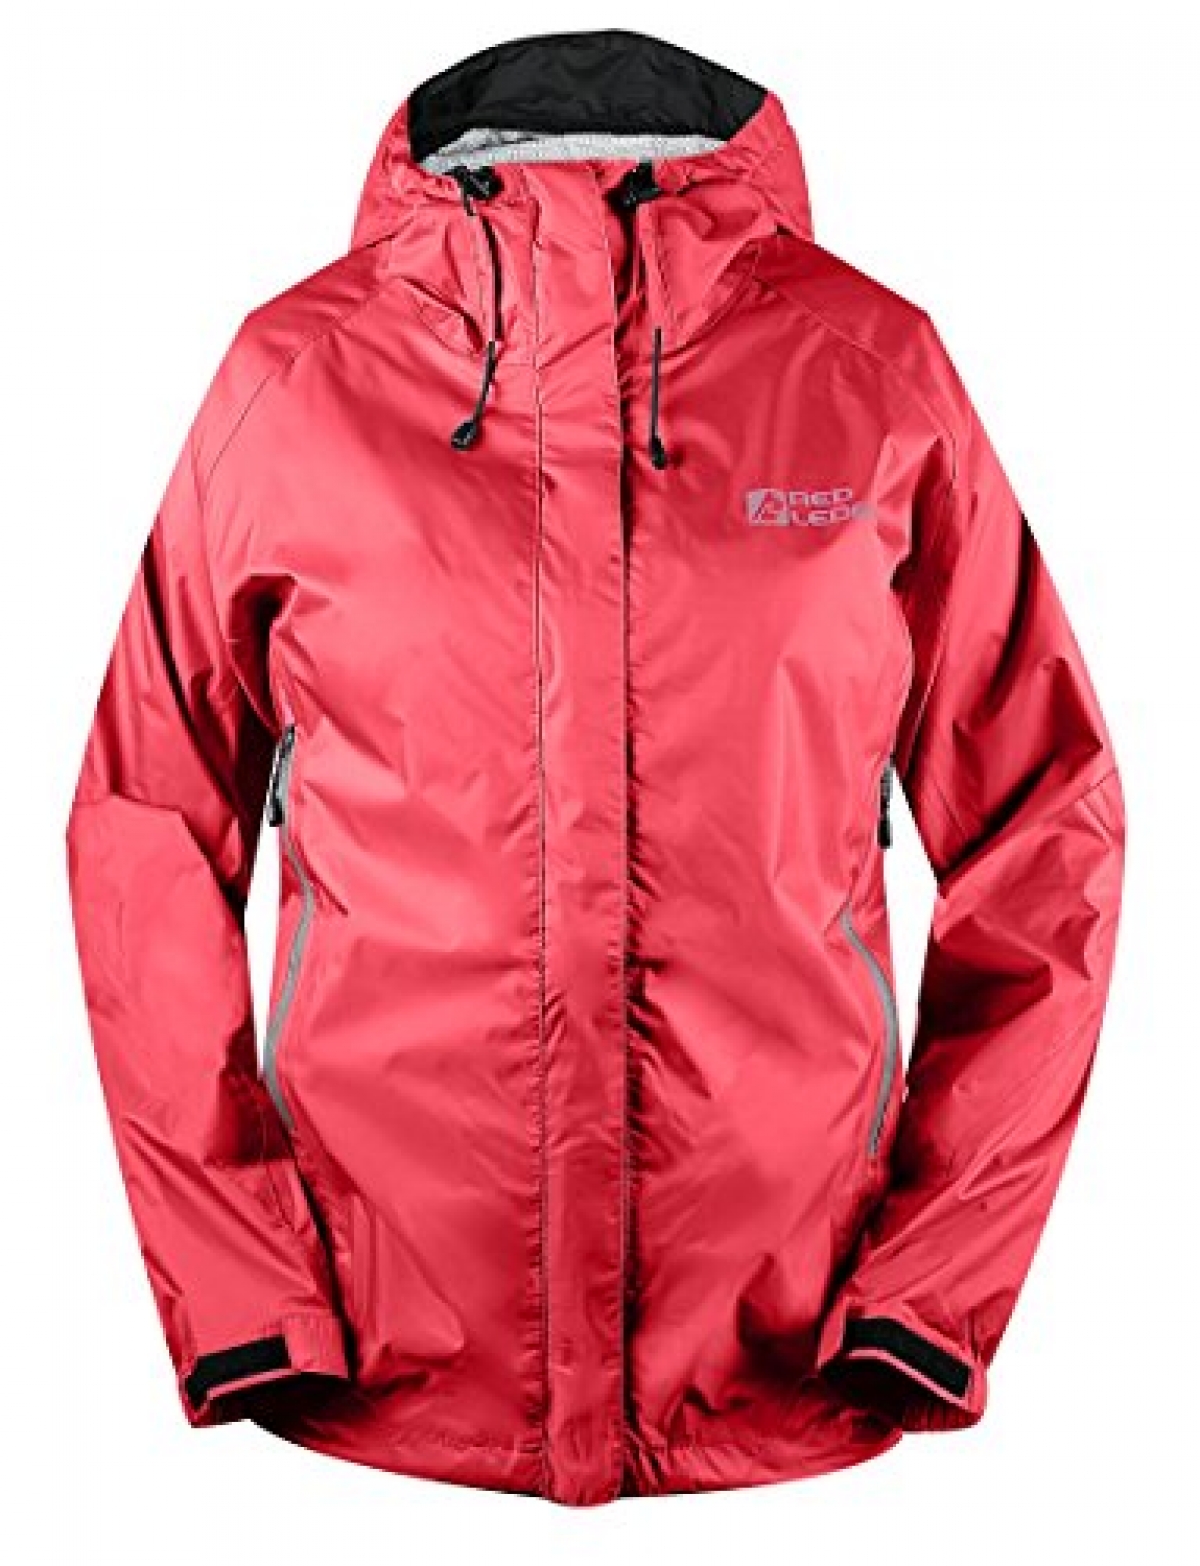 Hawiton Womens Lightweight Insulated Packable Jacket Hooded Down Jackets Parkas Red 